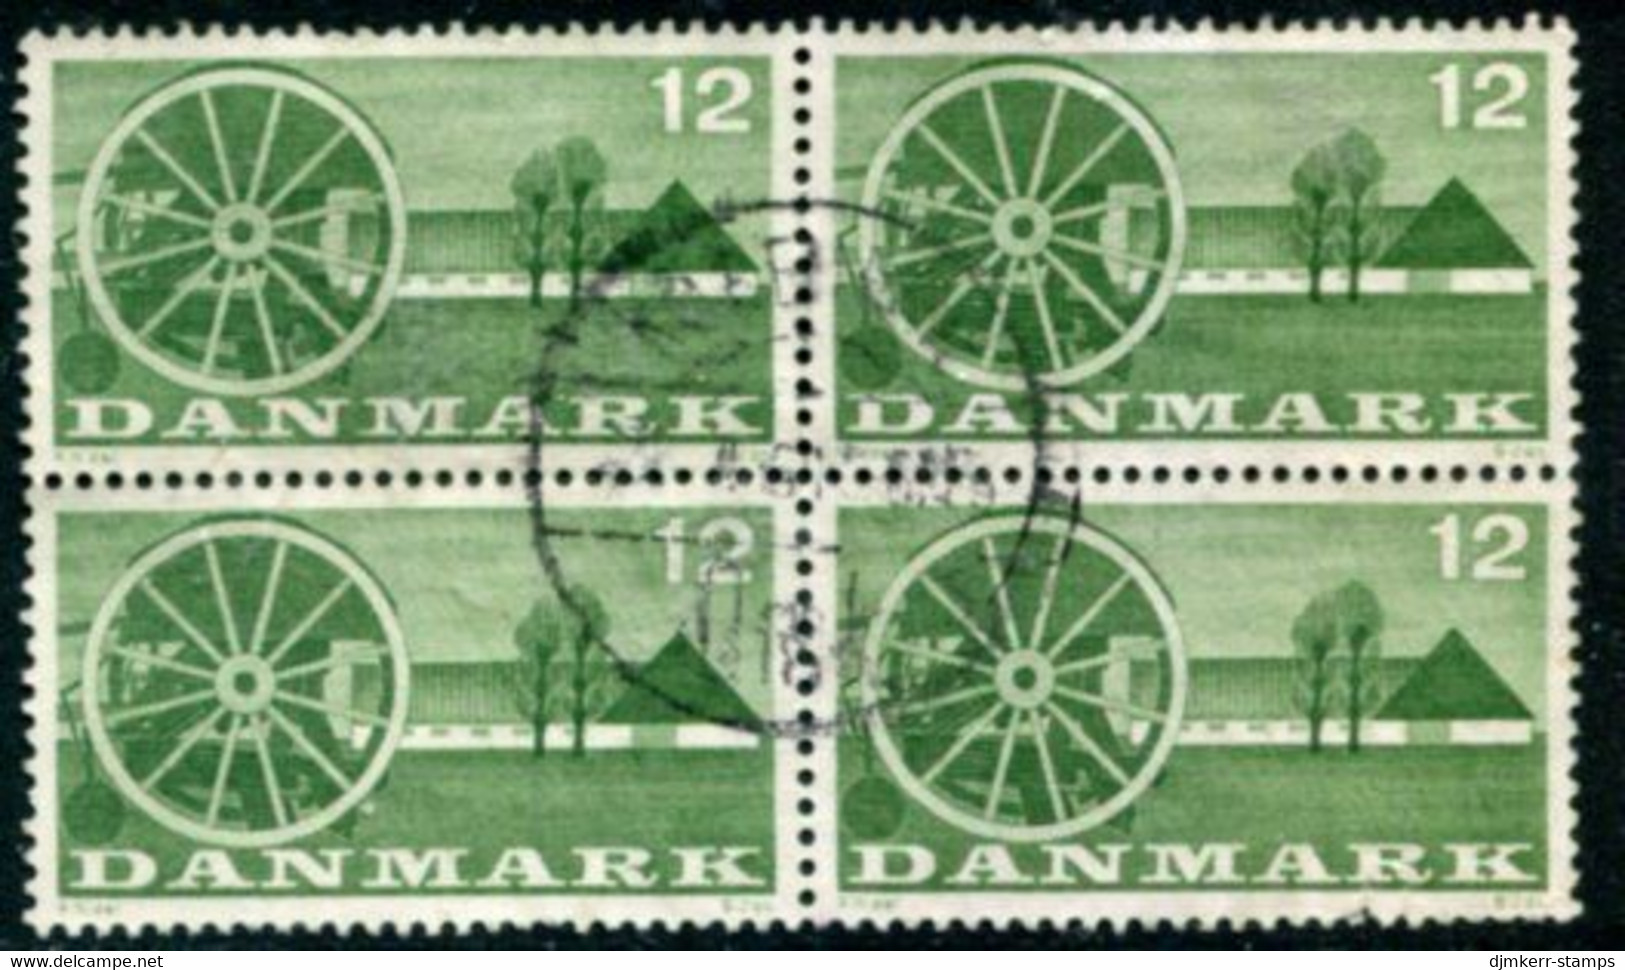 DENMARK 1960 Agriculture 12 Øre Block Of 4 Used   Michel 378 - Used Stamps